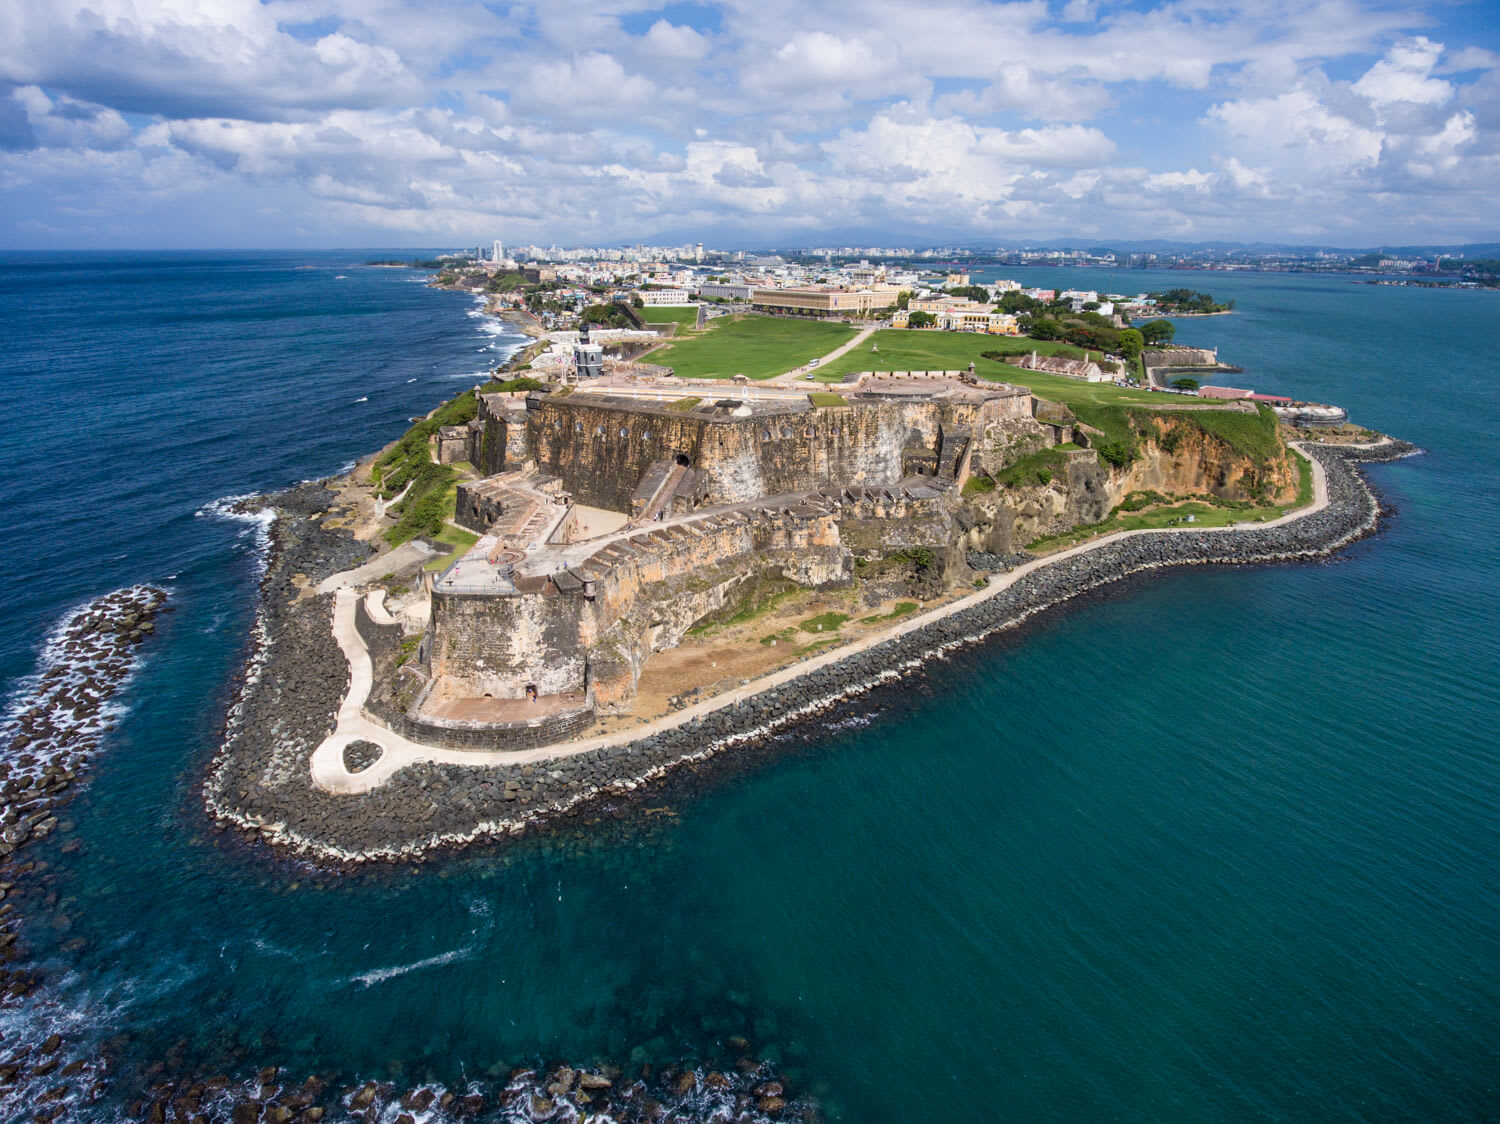 Discover San Juan: 25 of the Best Things To Do in Puerto Rico's Capital City